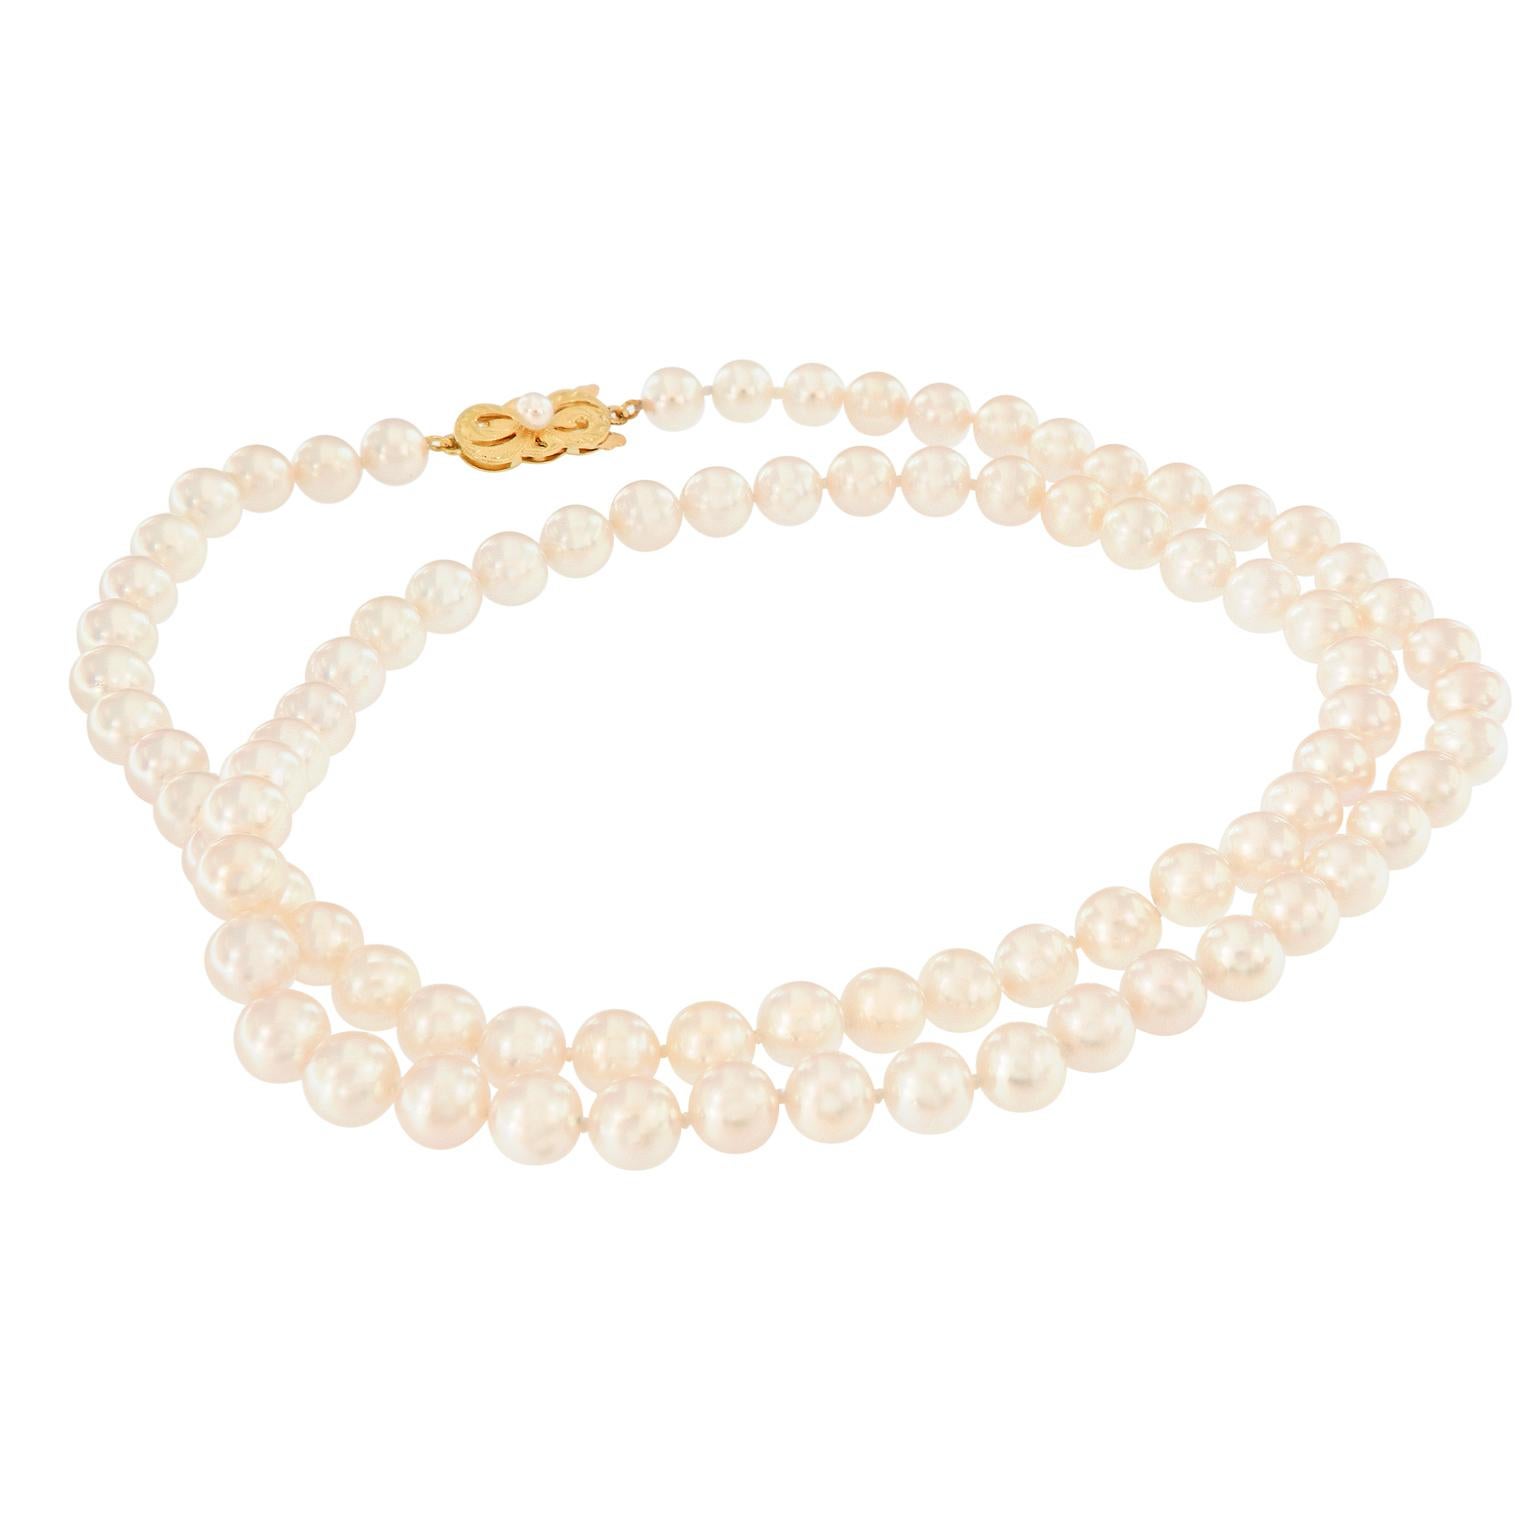 This pretty Mikimoto pearl necklace features 6.5-7 mm Akoya pearls and is 24 inches long. The clasp is 18k yellow gold and is set with a pearl at its center. This previously owned piece is in excellent condition. Weighs 31.9 grams.